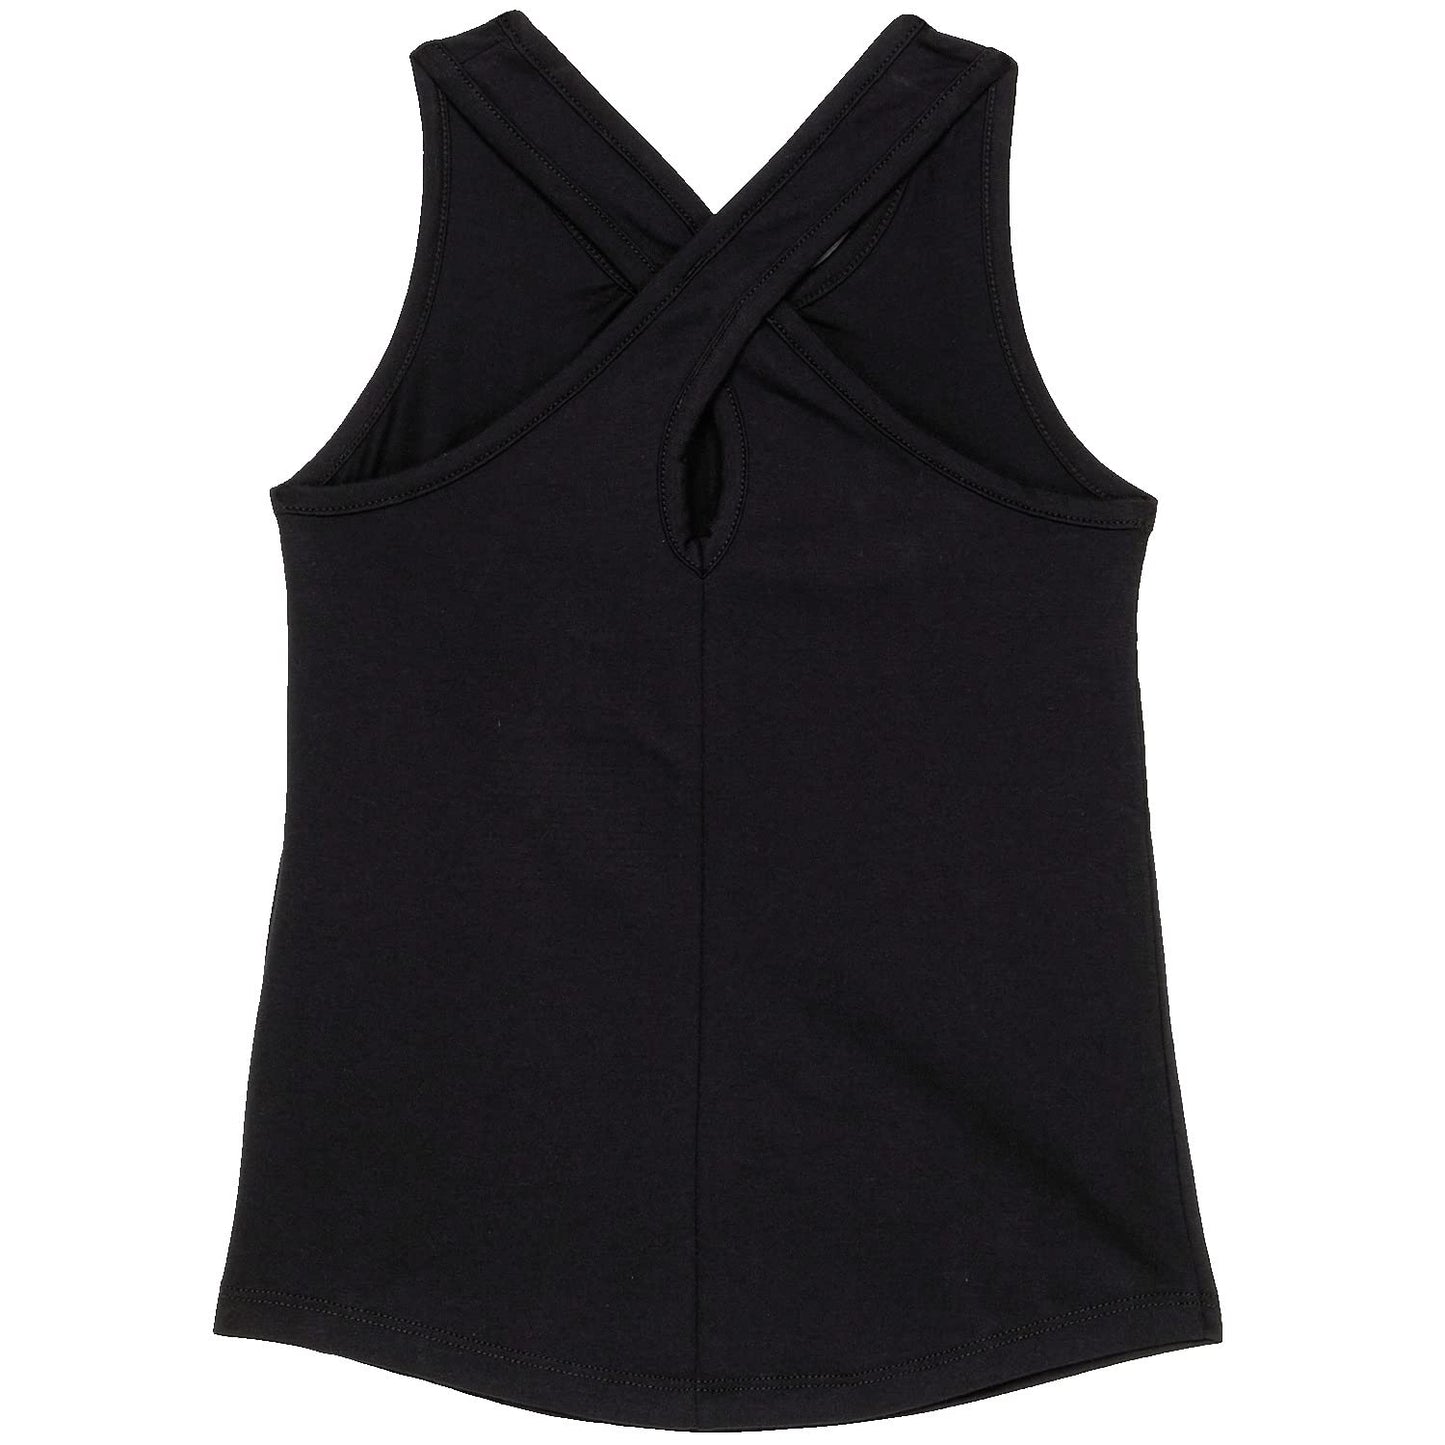 Image 2 of Graphic Tank Top (Toddler)